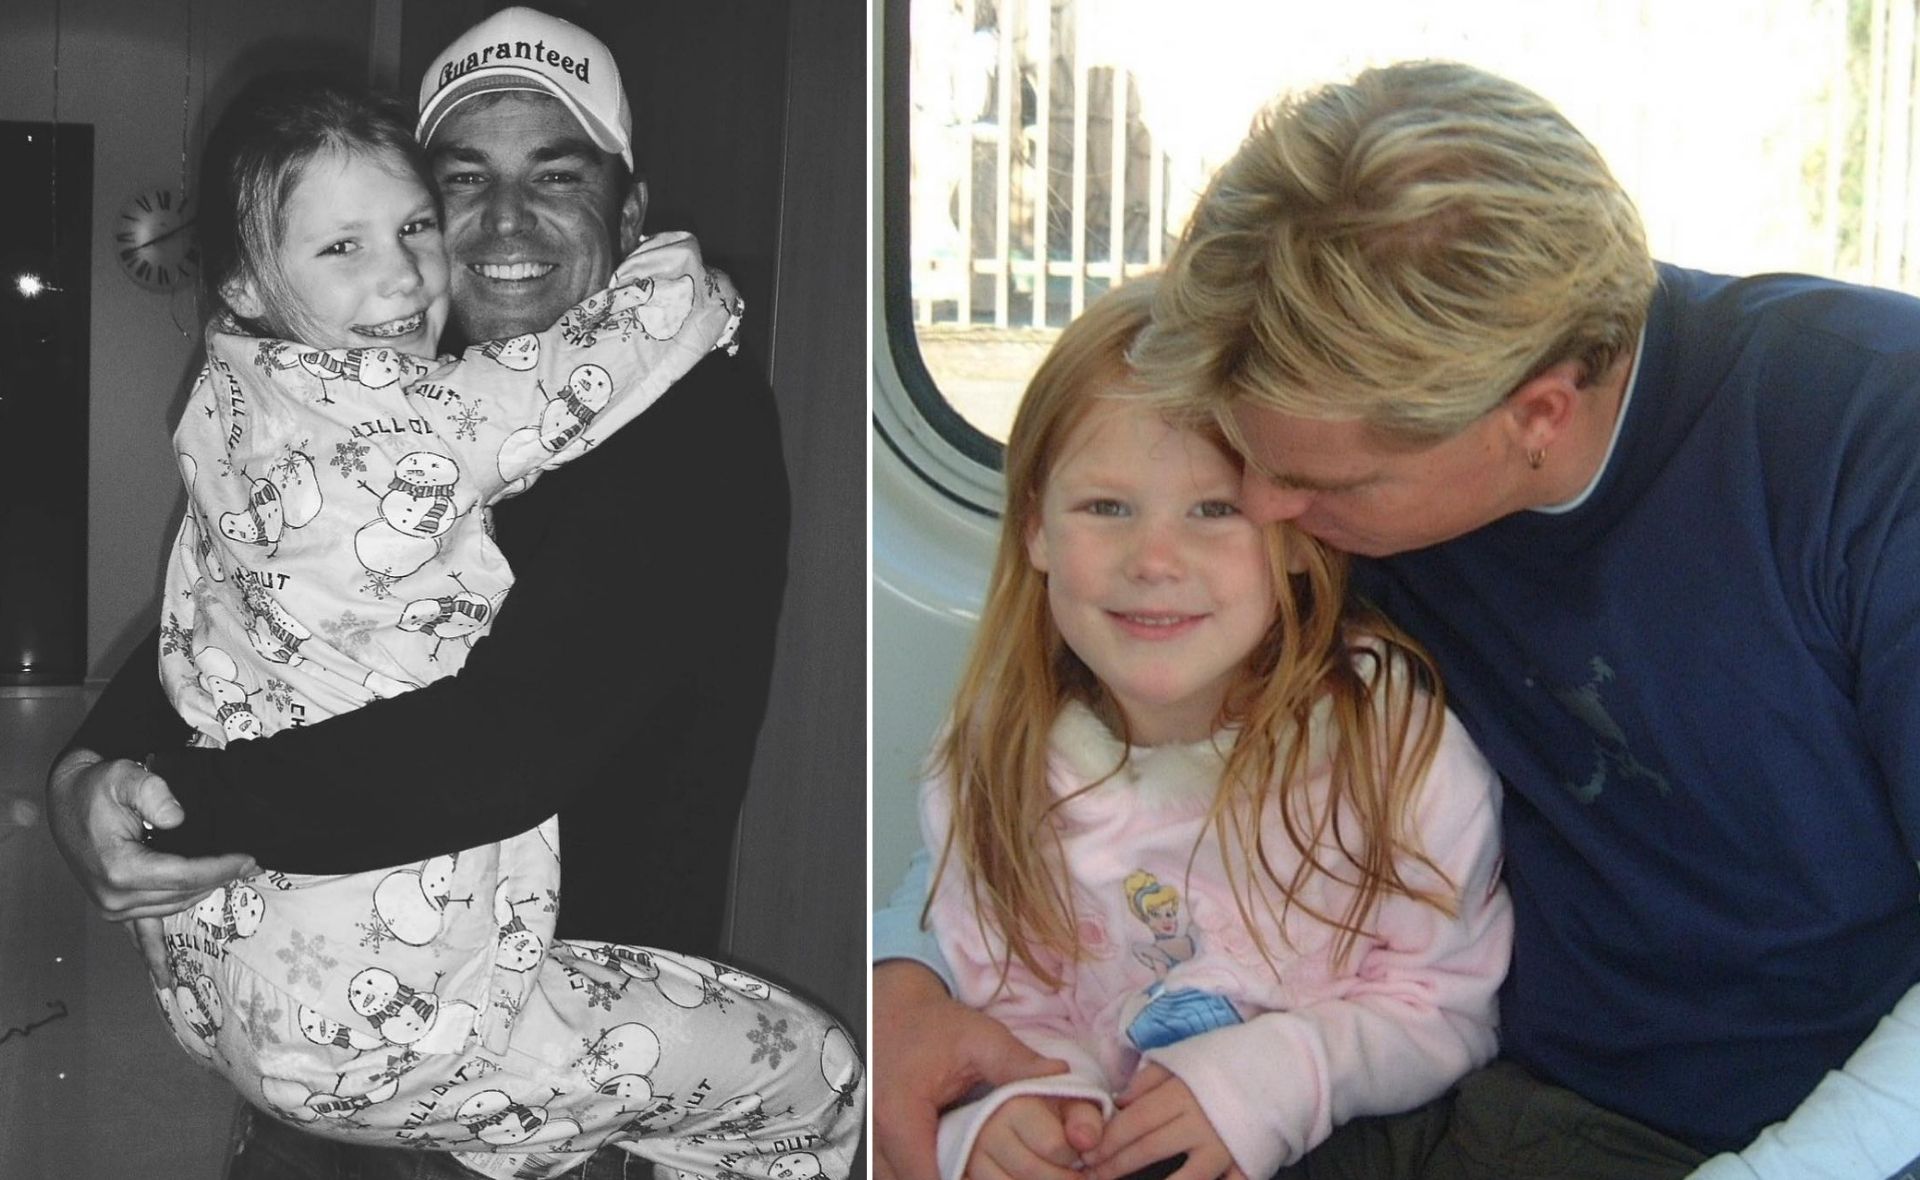 “So similar in so many ways”: Shane Warne’s close bond with his eldest daughter Brooke